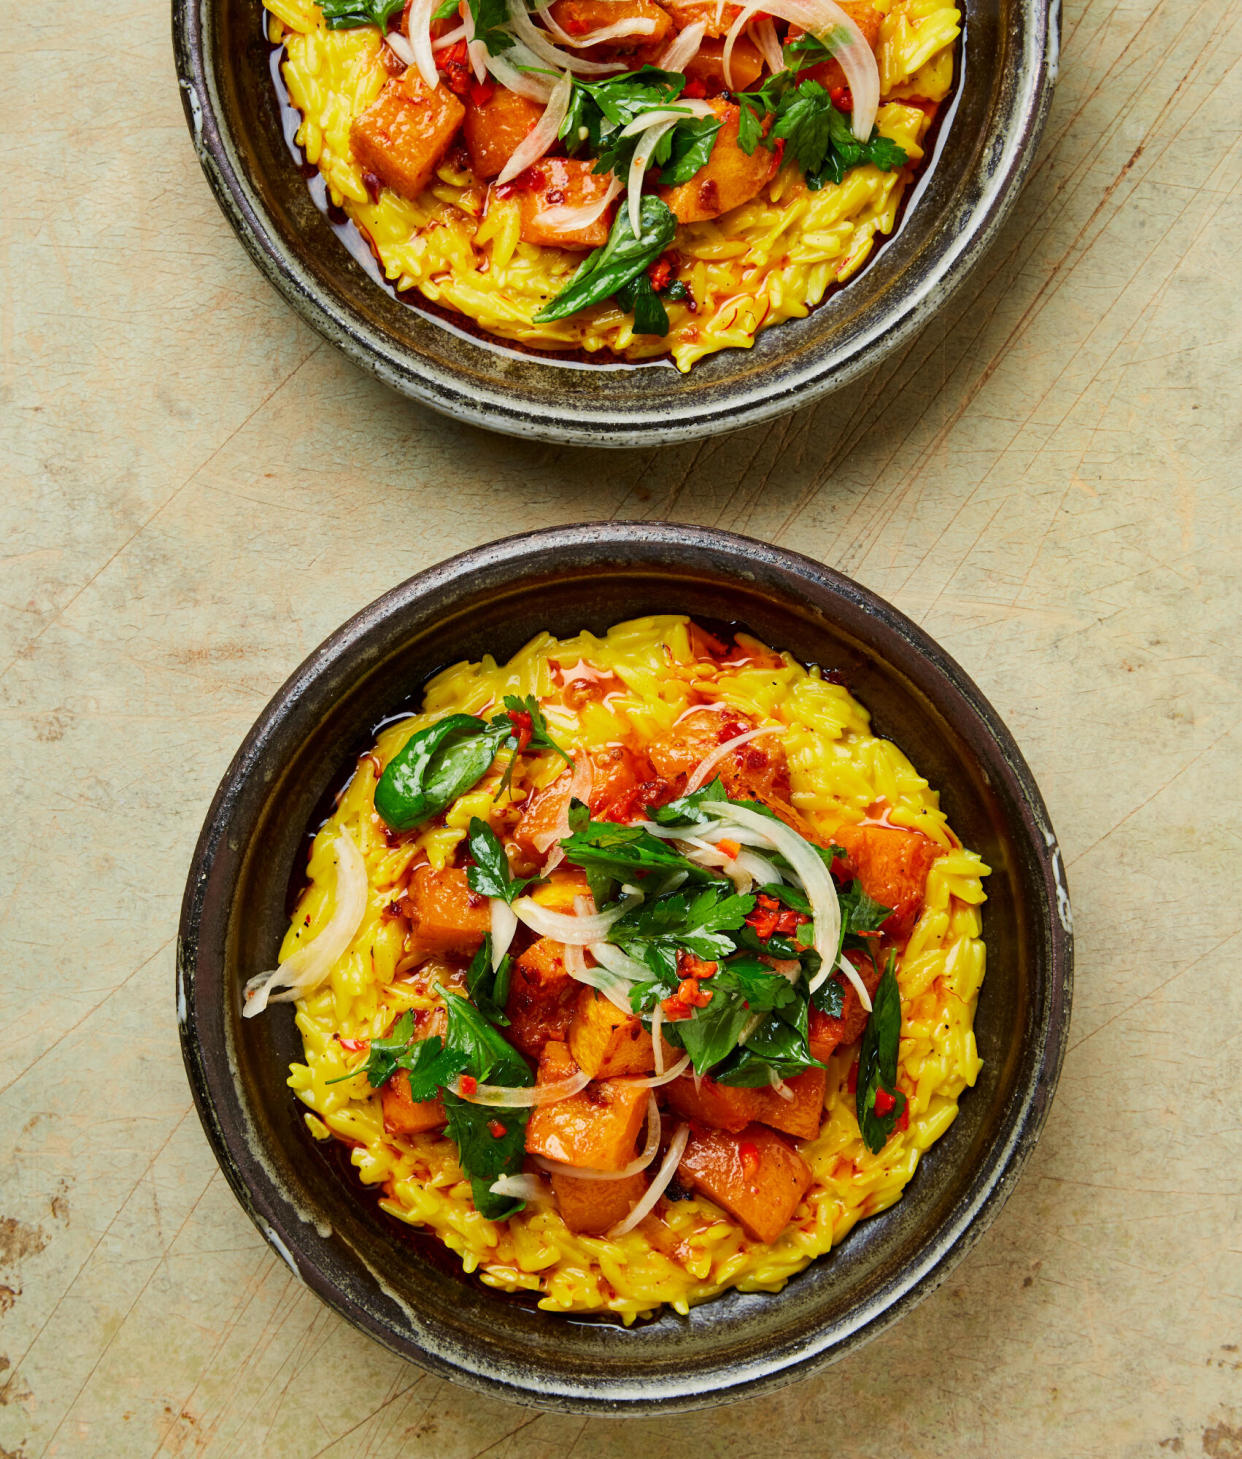 <span>‘Very comforting’: Ixta Belfrage’s creamy saffron orzo with roast butternut squash and scotch bonnet.</span><span>Photograph: Louise Hagger/The Guardian. Food styling: Emily Kydd. Prop styling: Jennifer Kay. Food styling assistant: Valeria Russo.</span>